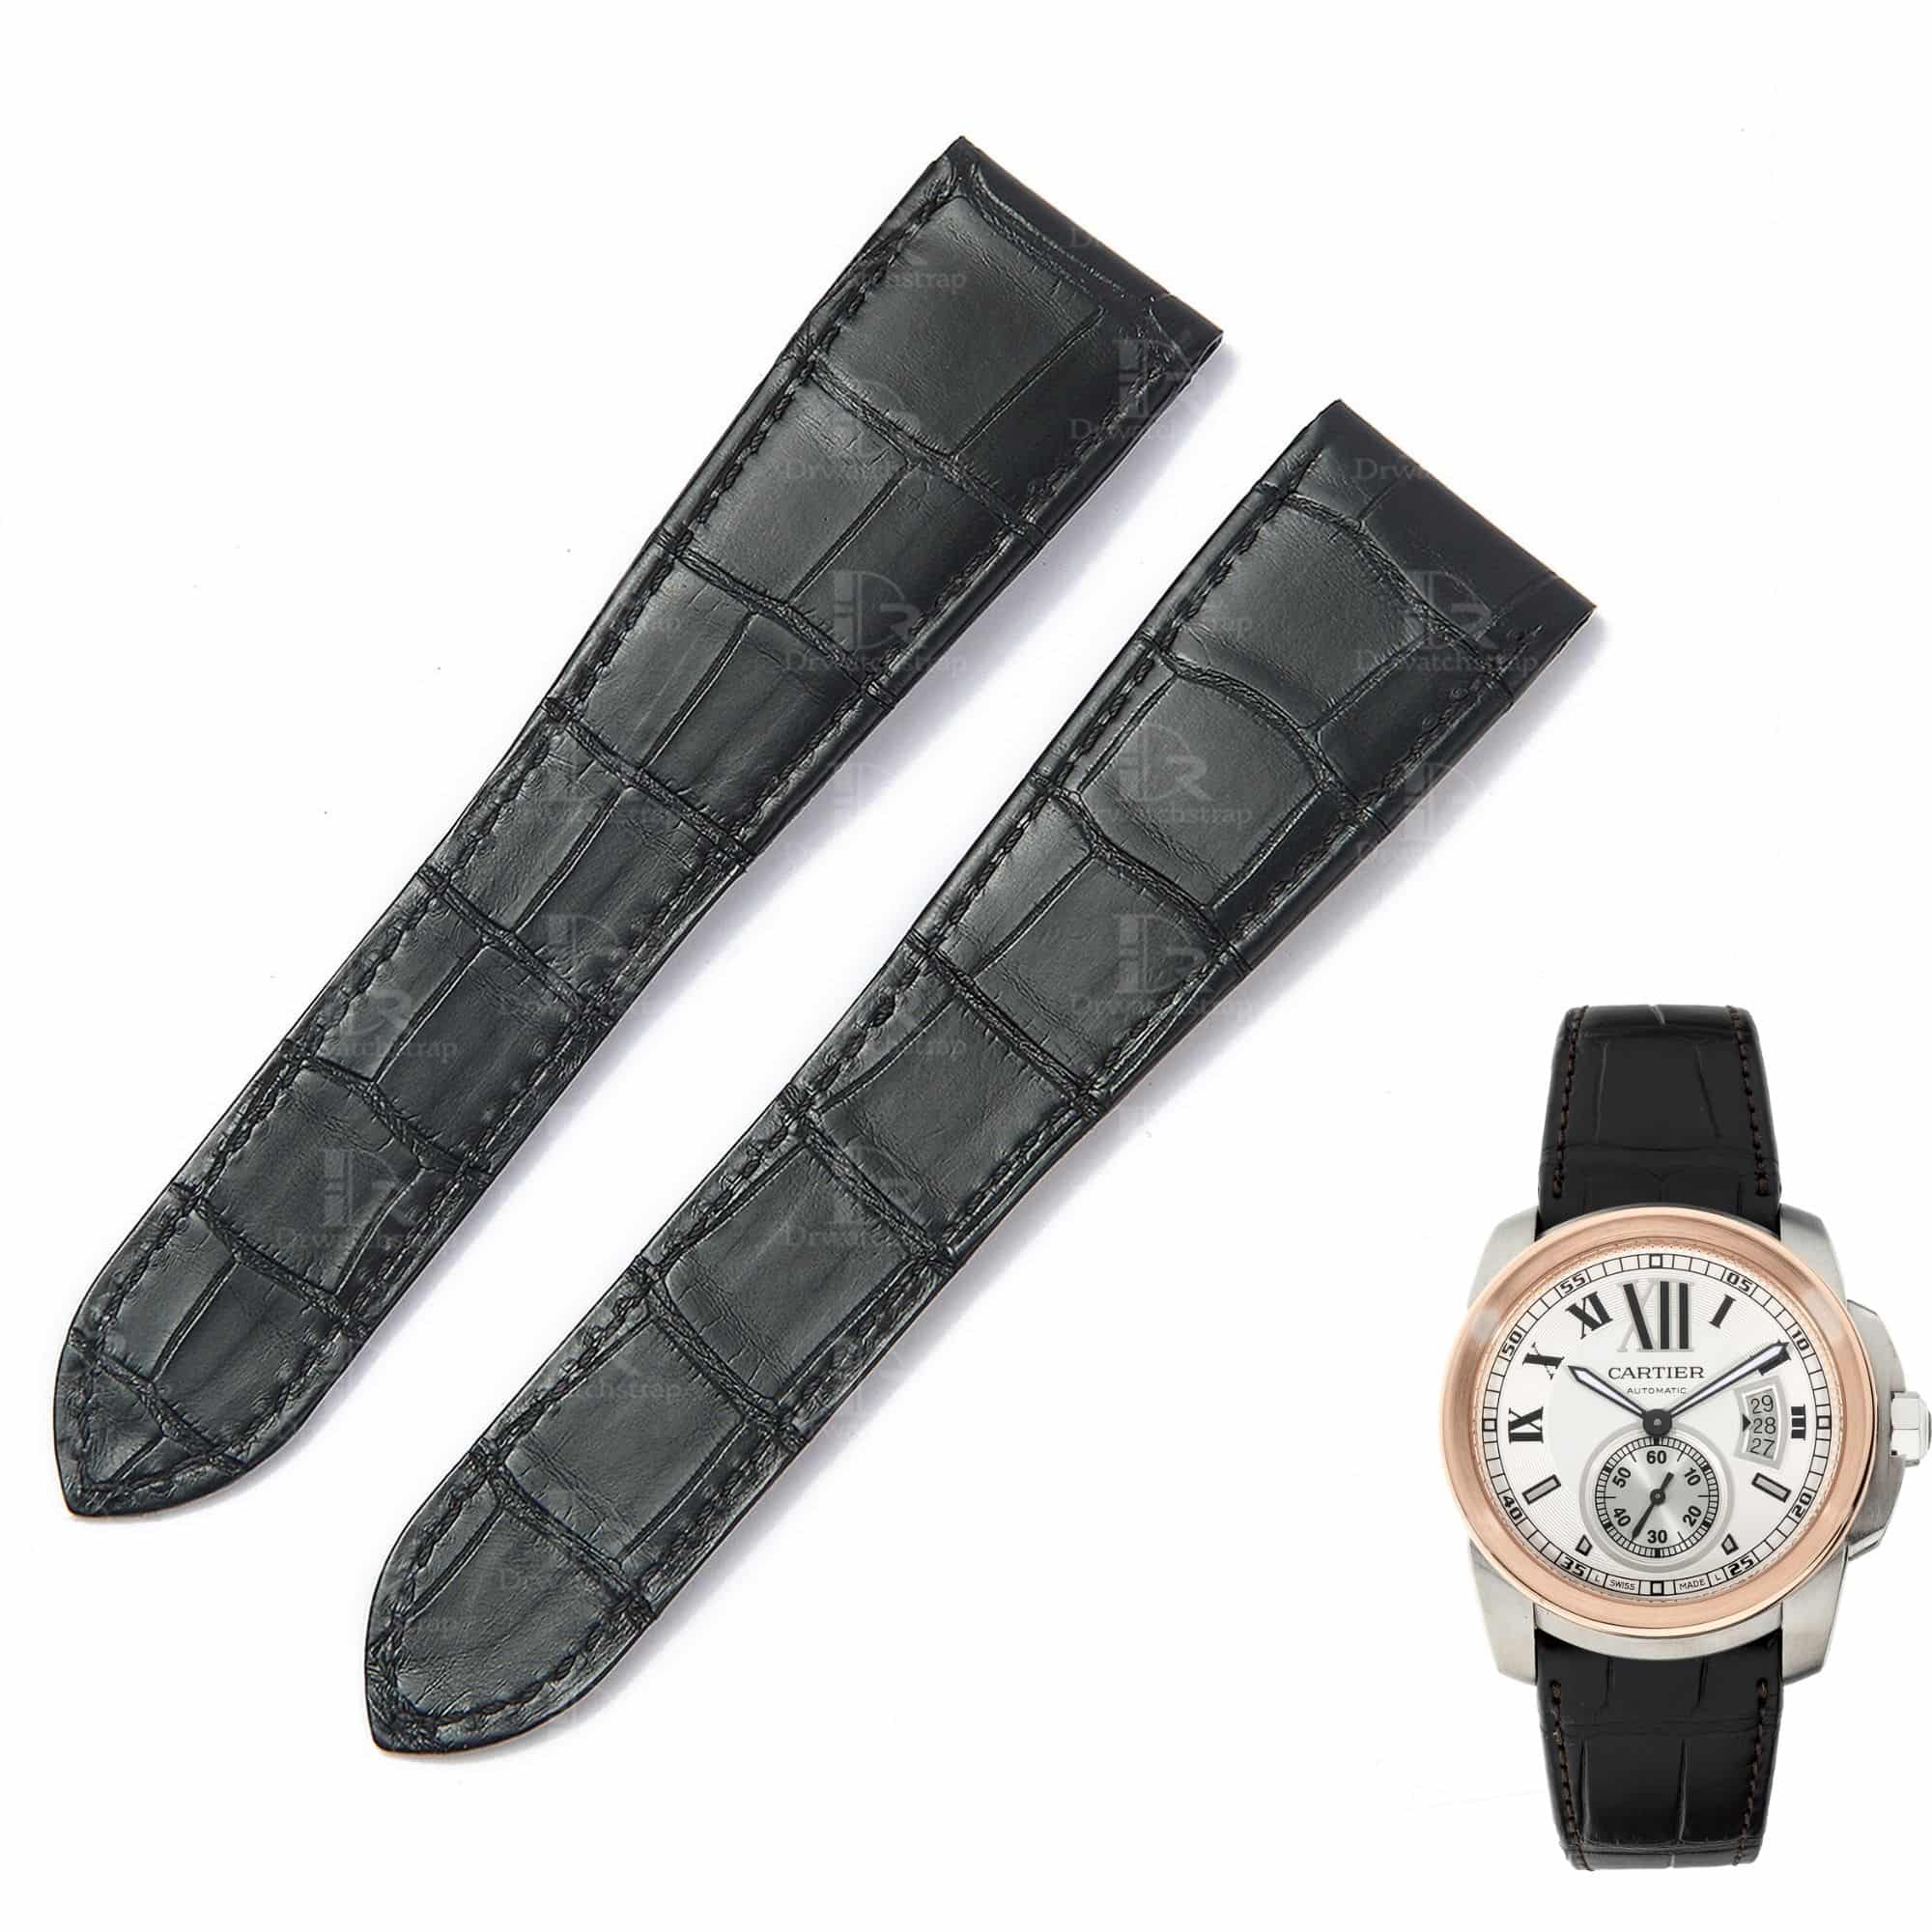 Best quality replacement black alligator crocodile leather Cartier Calibre watch strap and watch band for Cartier Calibre dive watches online - Aftermarket leather watchbands for Cartier Calibre at a low price